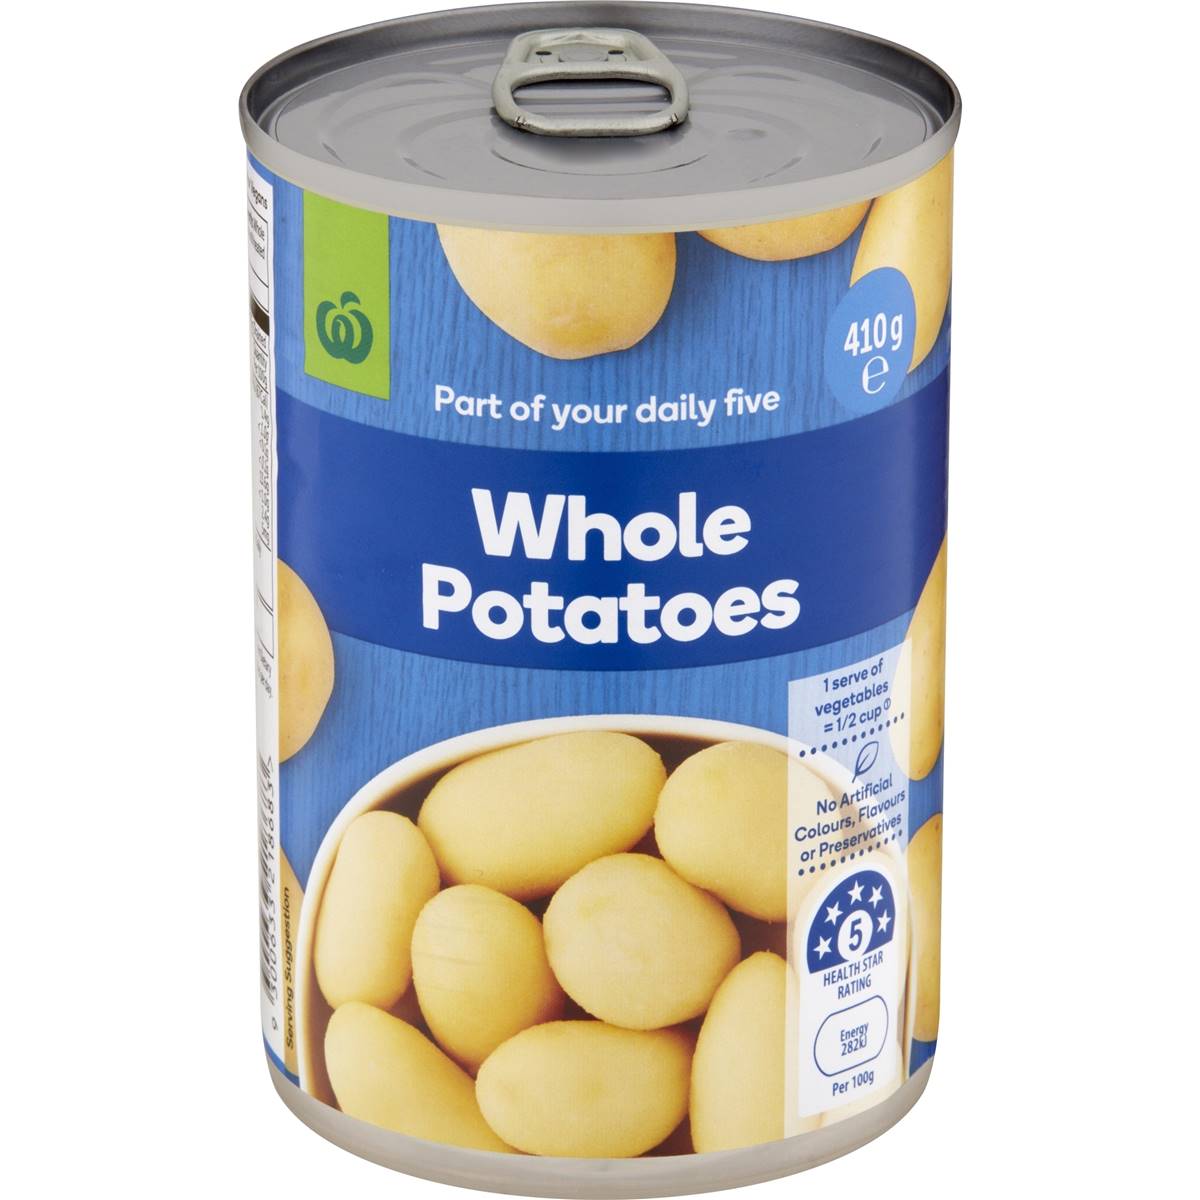 Calories in Woolworths Potato Whole